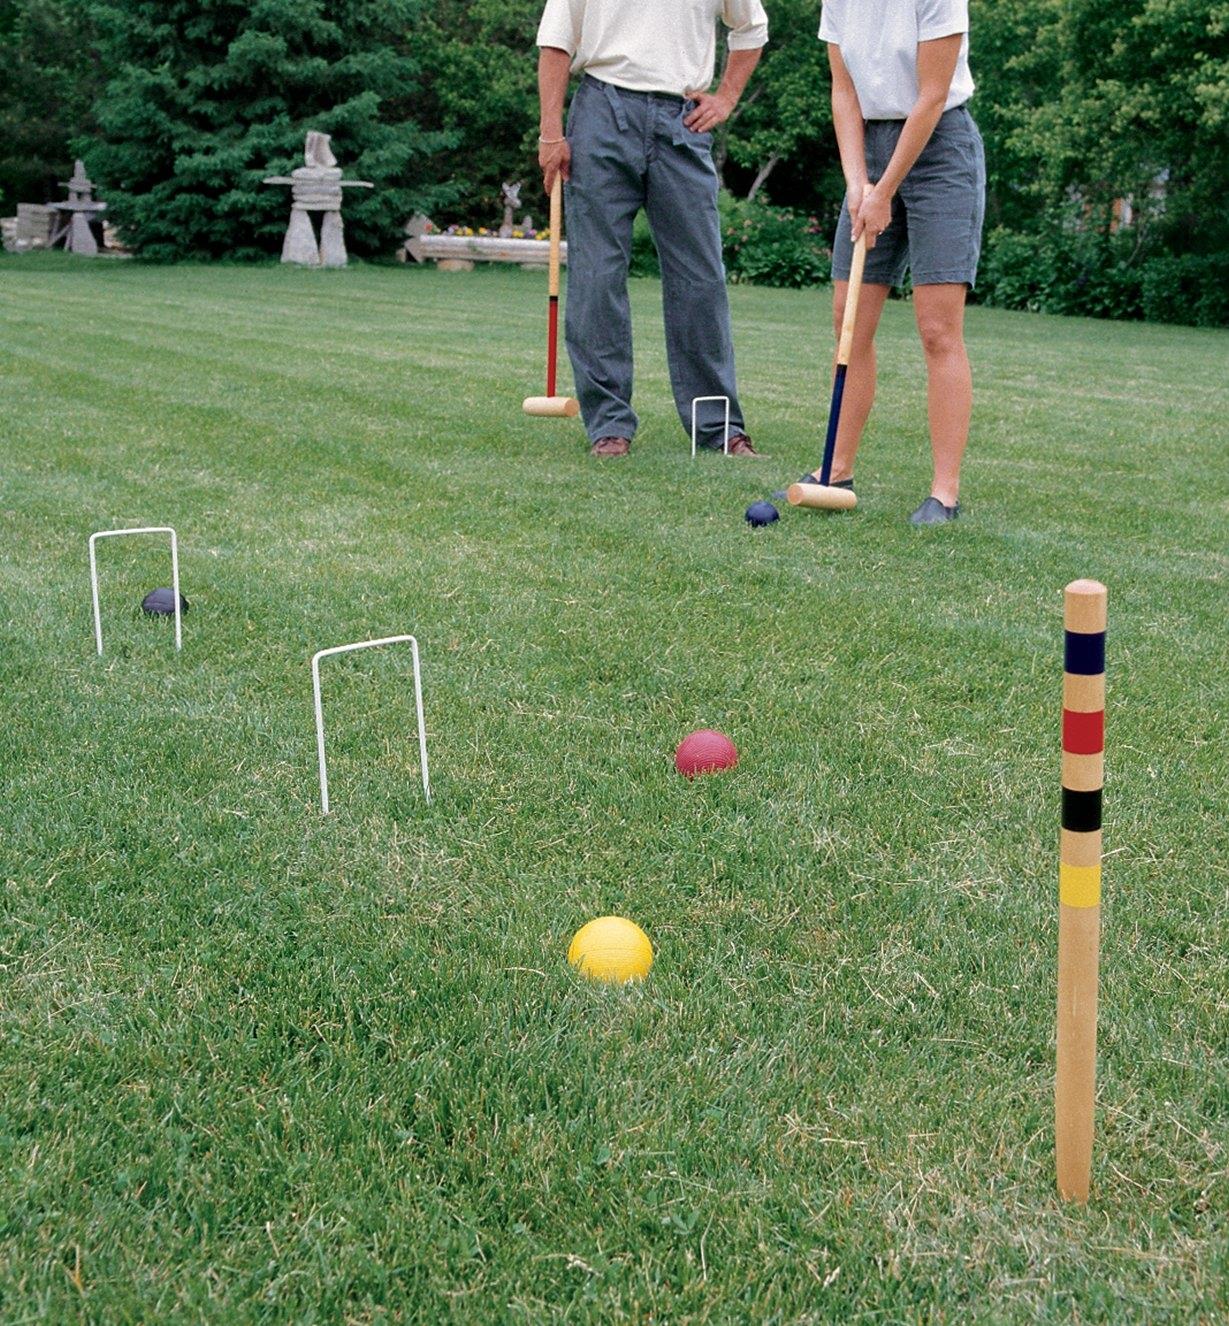 A man and woman playing croquet on grass